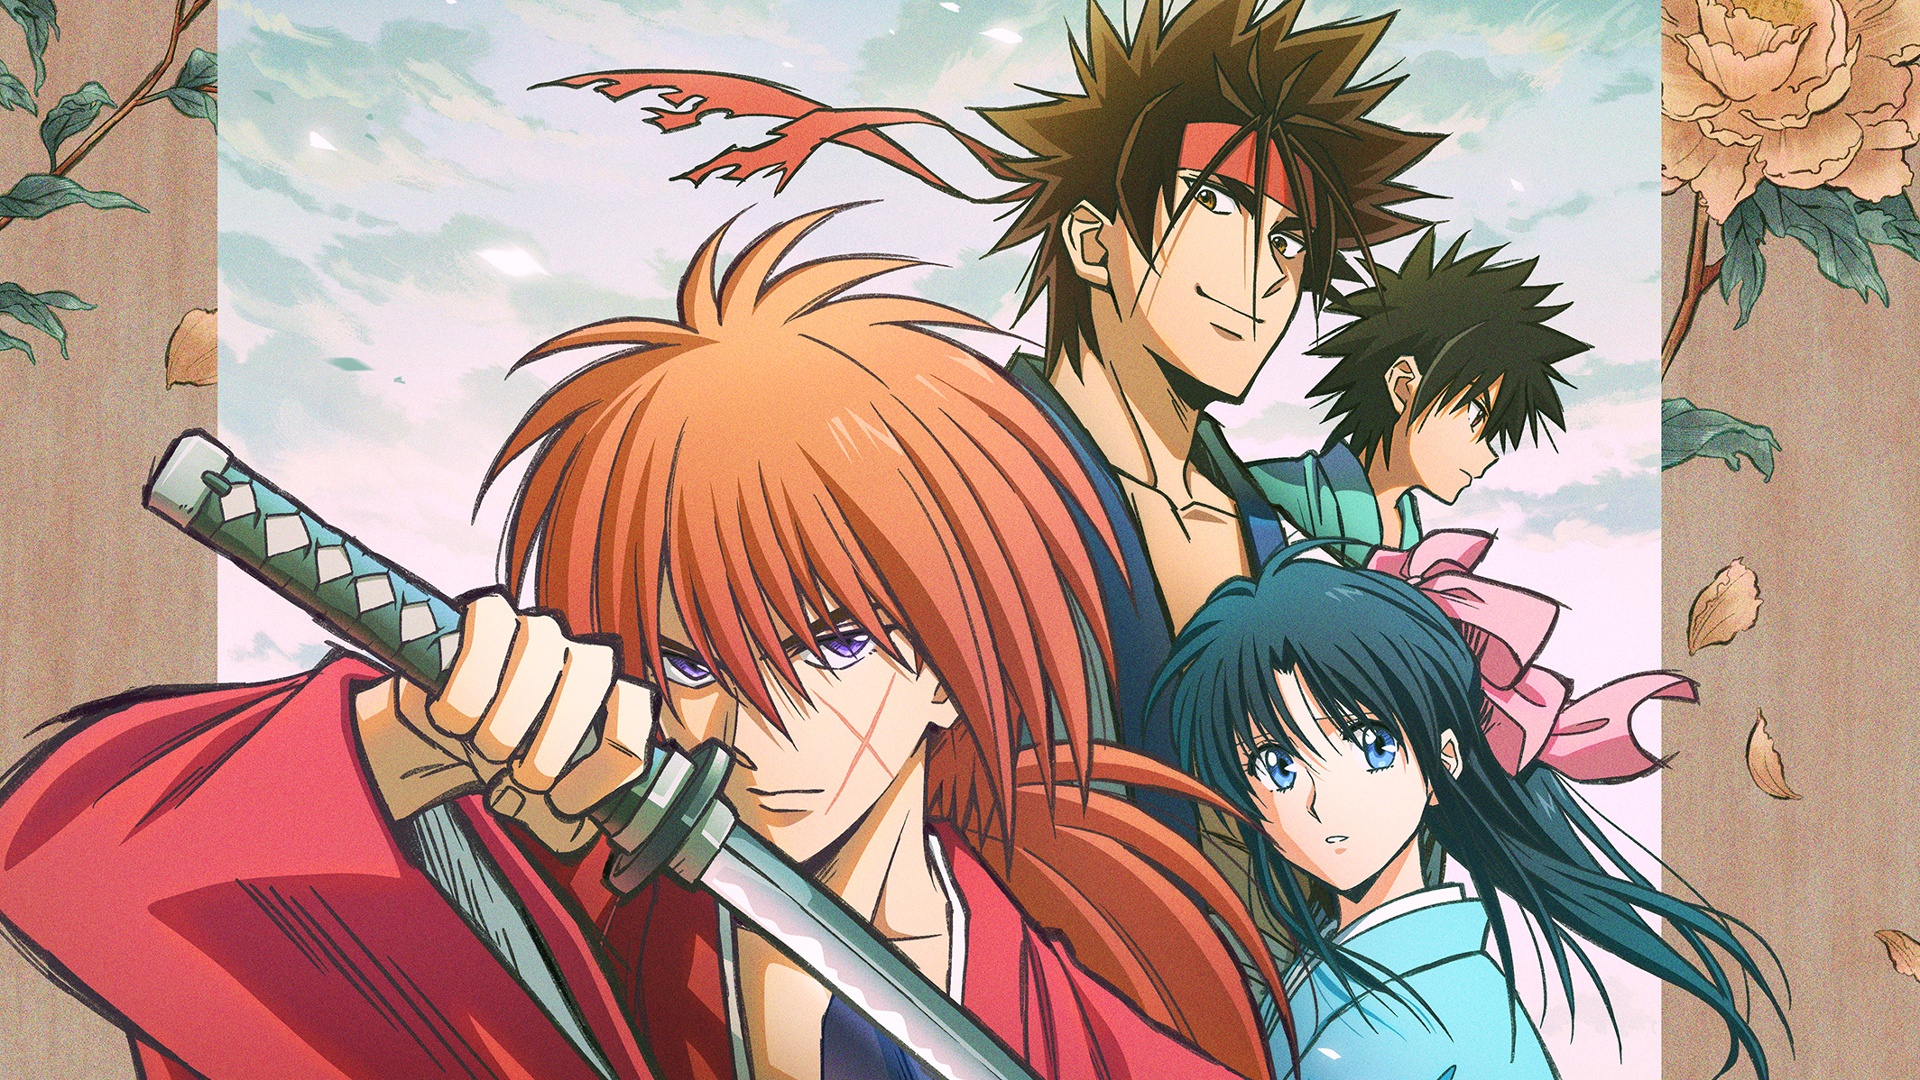 NOW STREAMING: The sword and the man Rurouni Kenshin